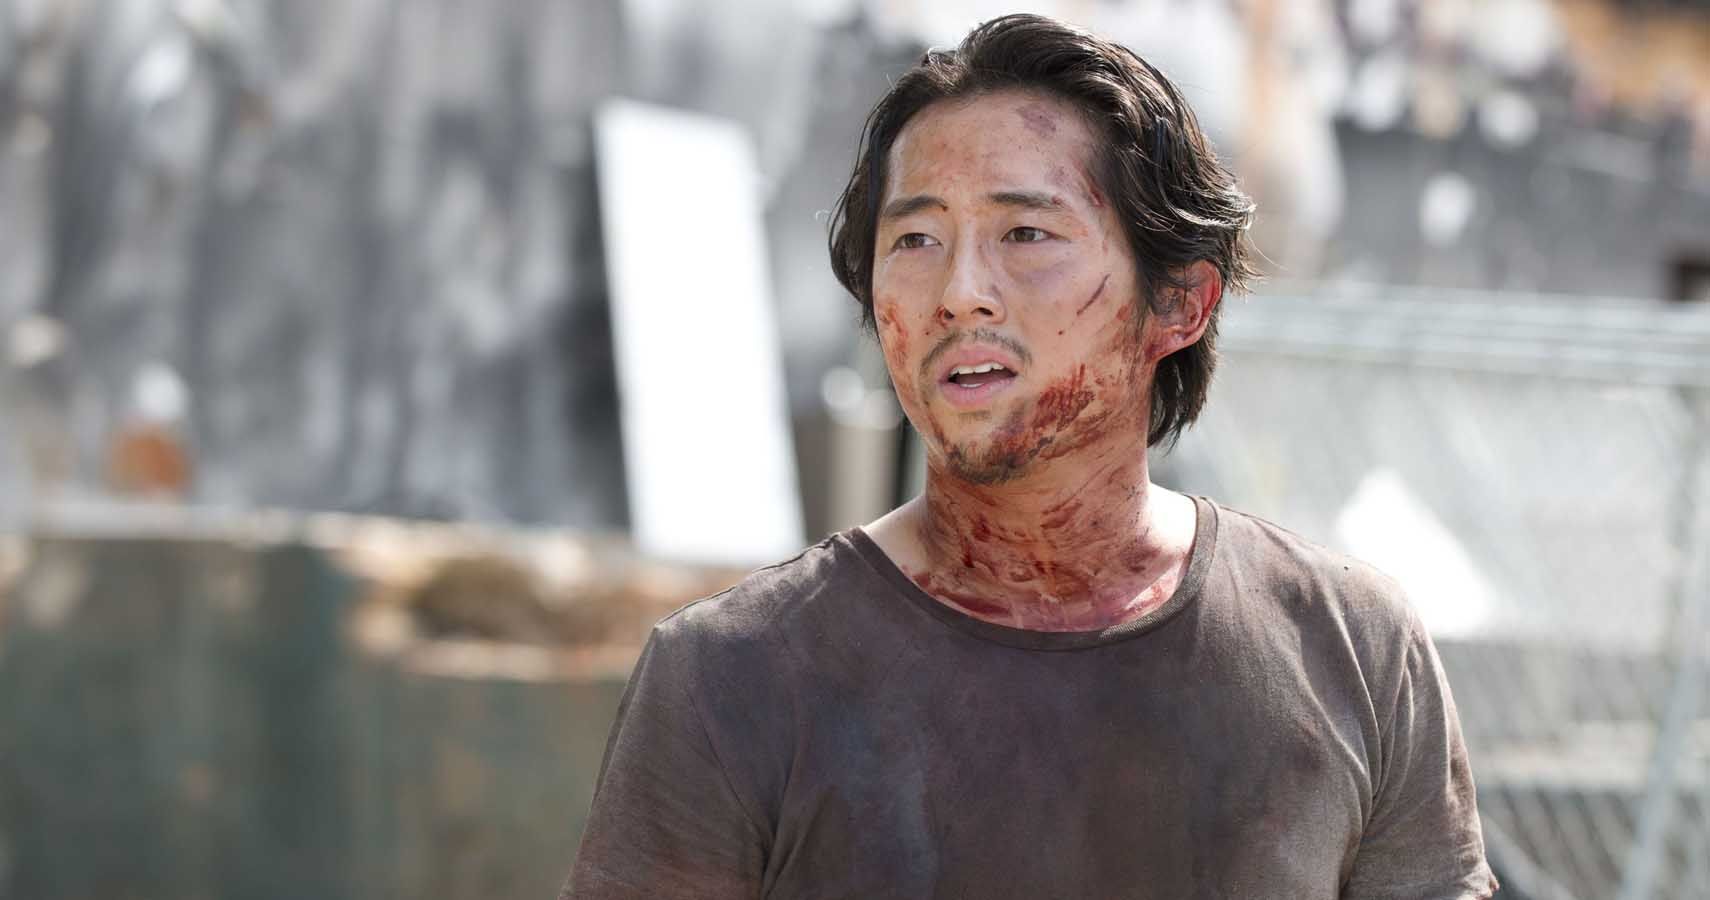 The Walking Dead: What Happens to Glenn? Understanding His Fate and Legacy